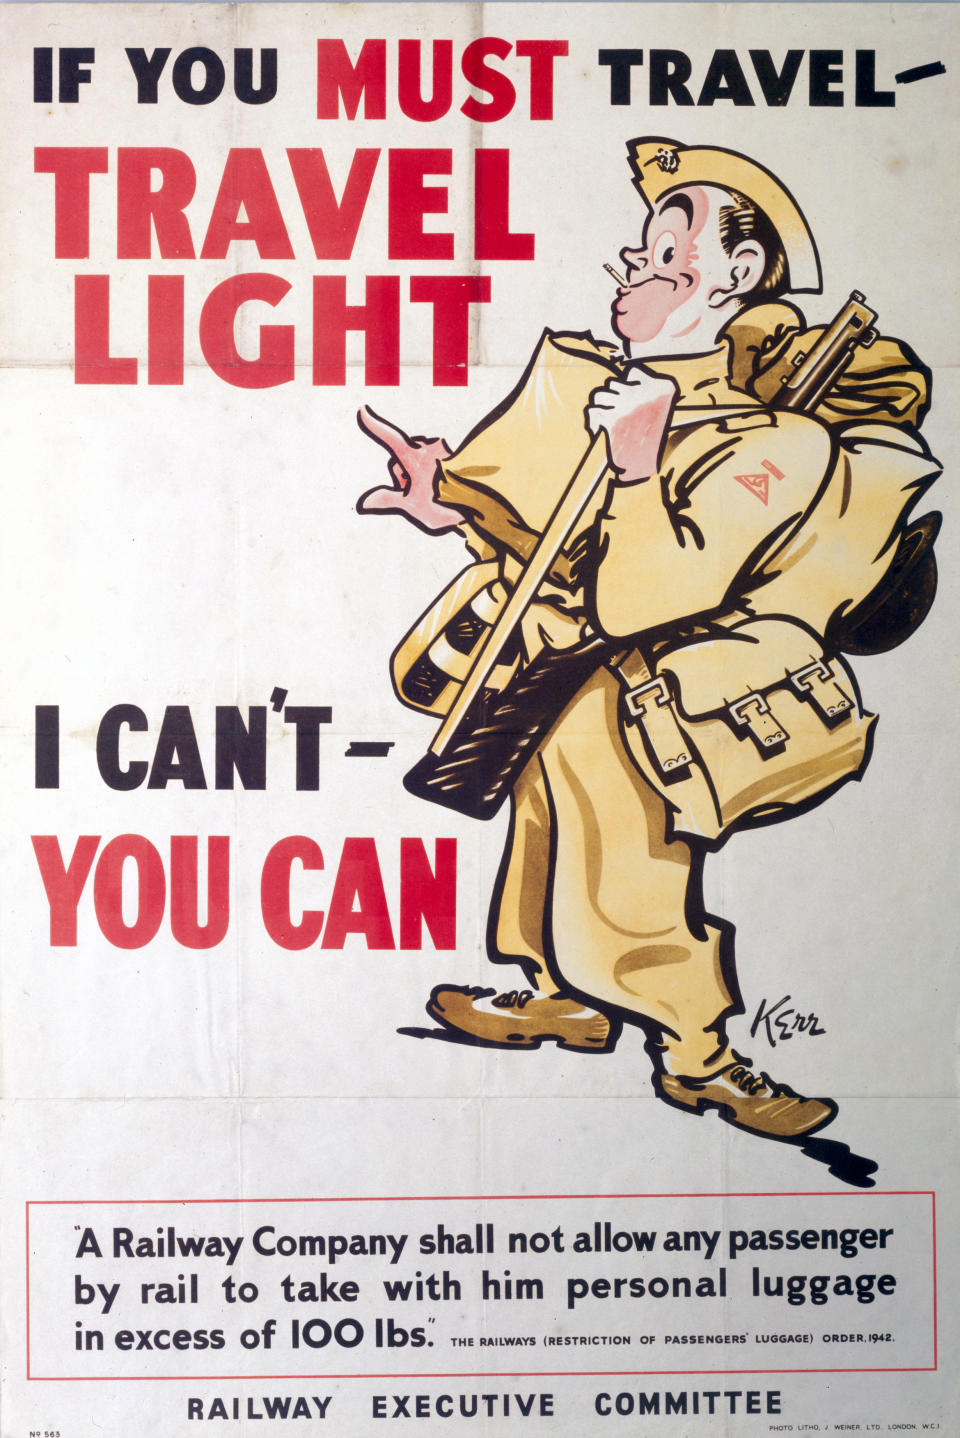 UNITED KINGDOM - MARCH 09:  Railway Executive Committee poster. 'If you must Travel Travel Light' by Kerr.  (Photo by SSPL/Getty Images)